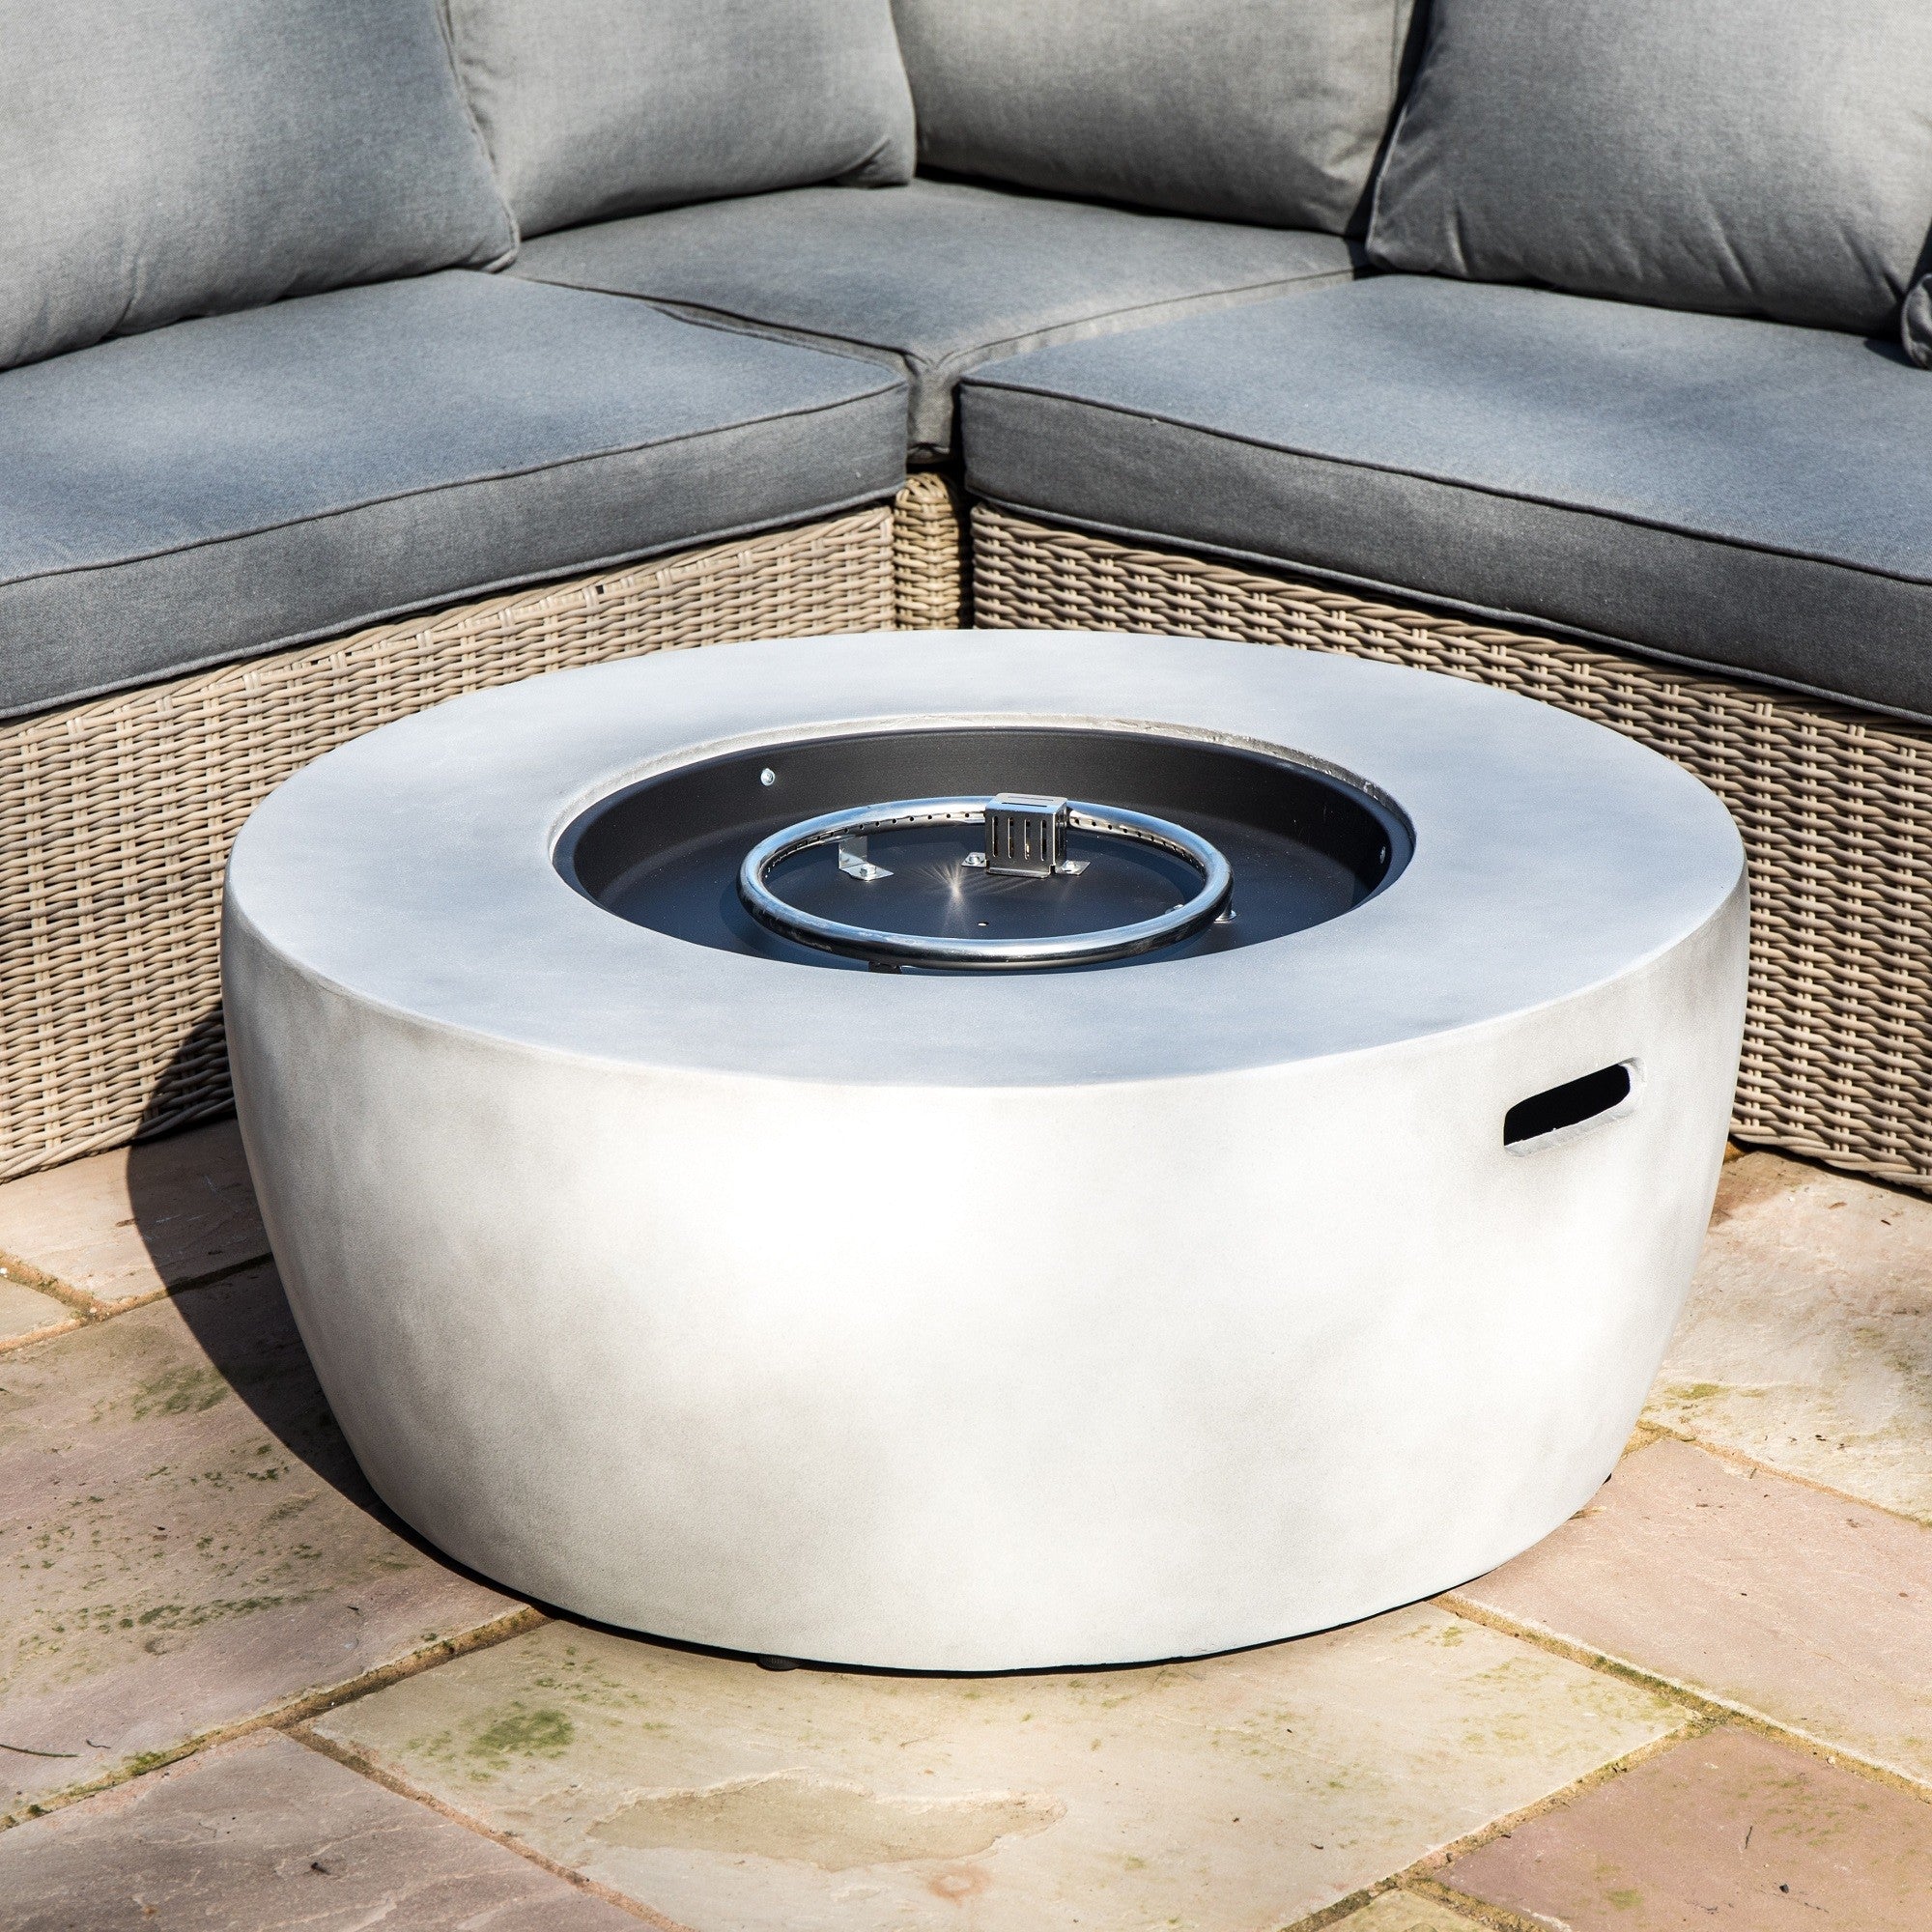 Teamson Home 36" Outdoor Round Propane Gas Fire Pit with Faux Concrete Base, Gray